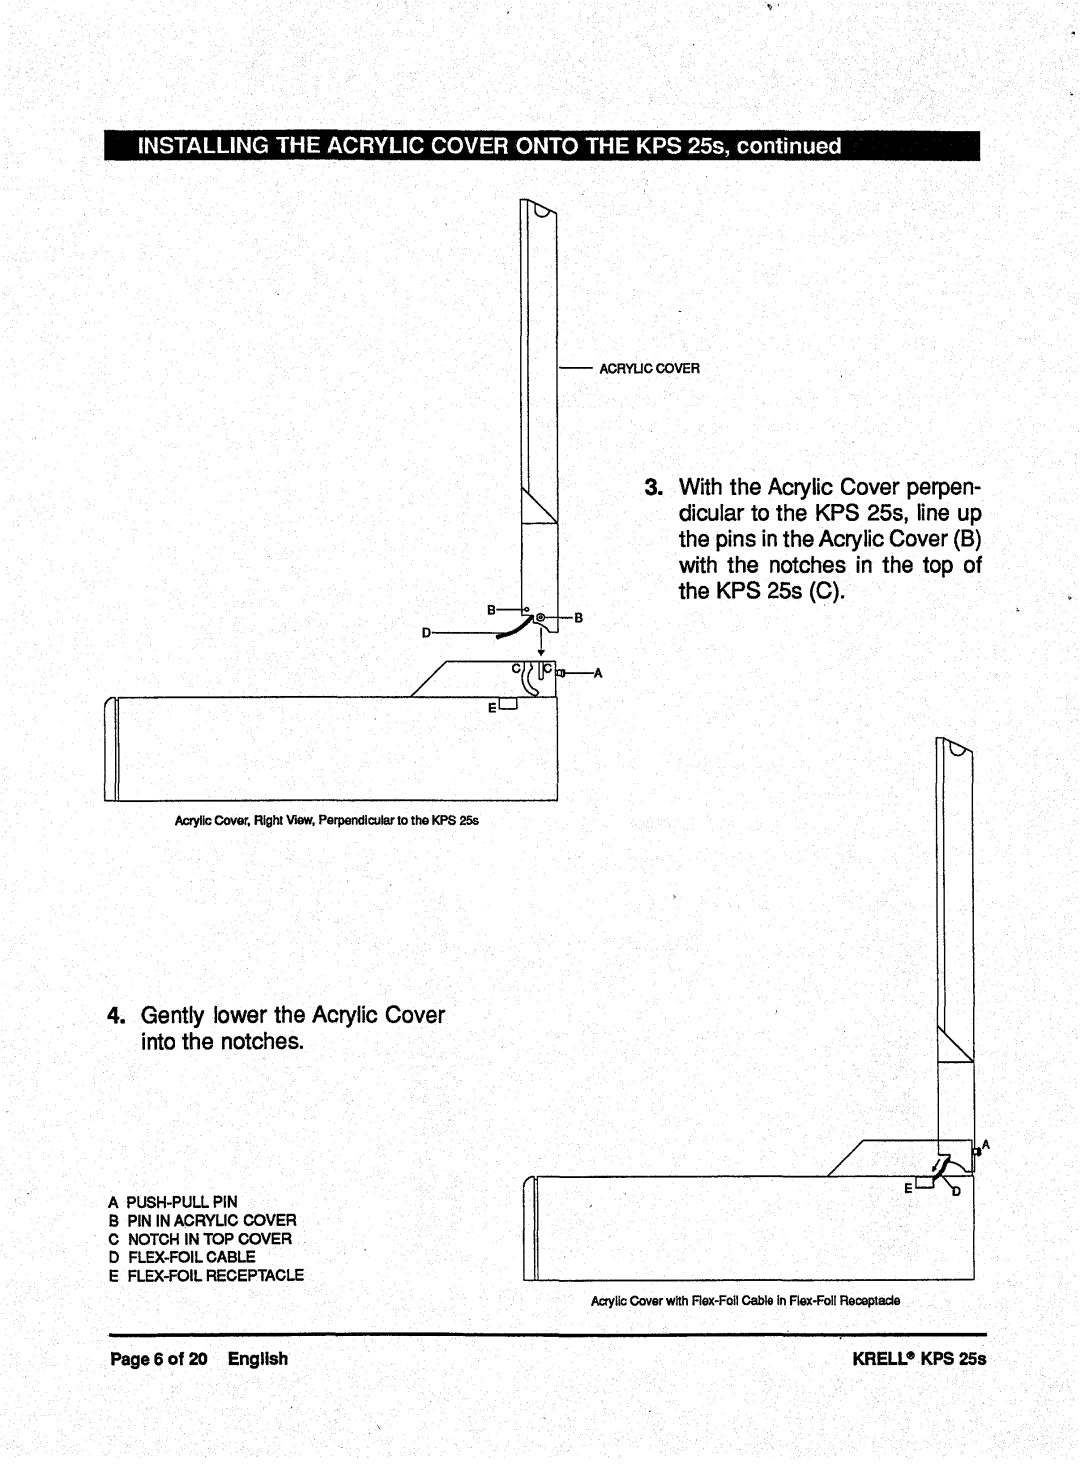 Krell Industries KPS 25s manual INSTALLINGTHEACRYLICCOVERONTOTHEKPS25s, continued 